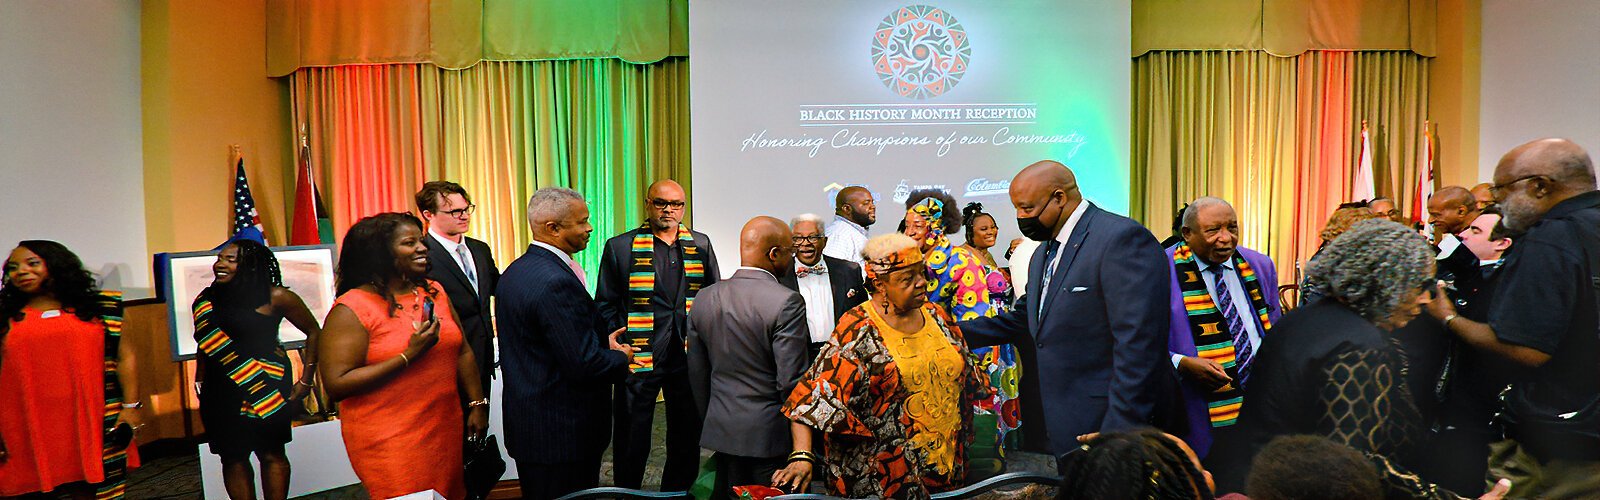 The Tampa Bay History Center presented their second annual Black History Month Reception, "Honoring Champions of our Community," in Tampa on Friday, February 24th.